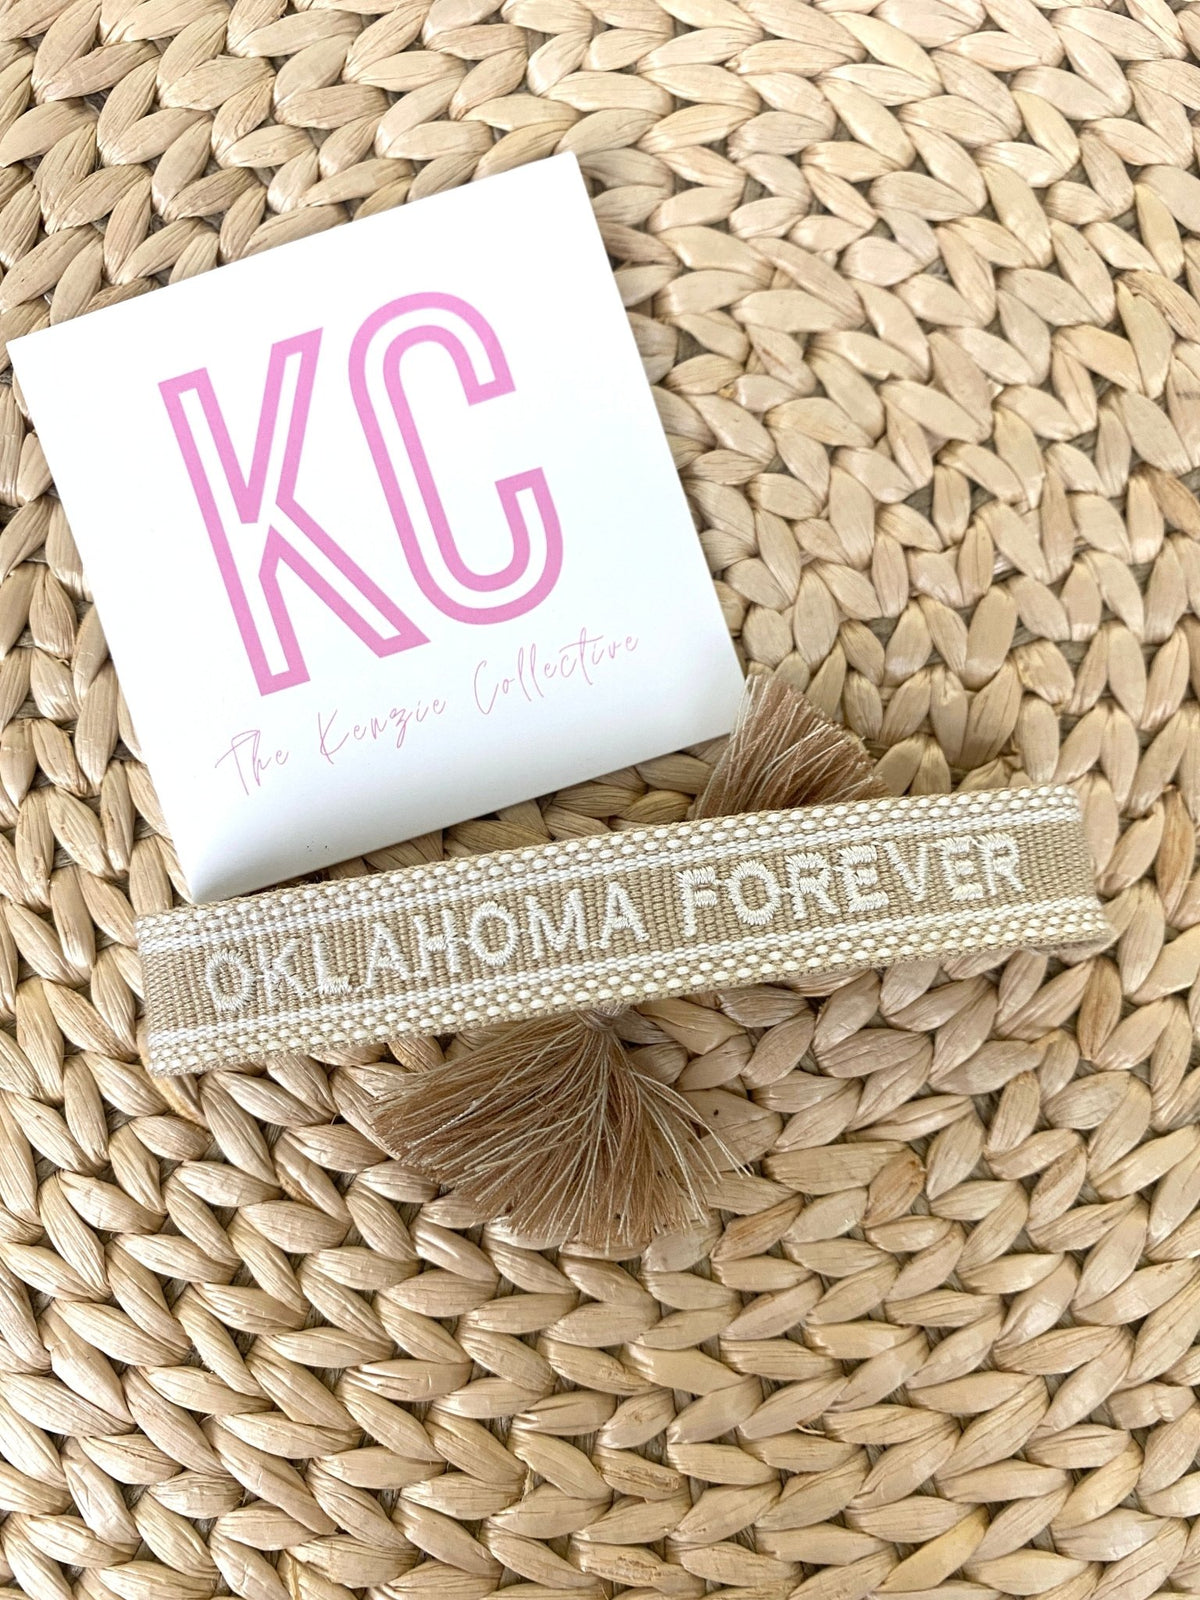 Oklahoma forever tassel bracelet tan - Stylish Bracelets - Affordable Jewelry and Belts at Lush Fashion Lounge Boutique in Oklahoma City